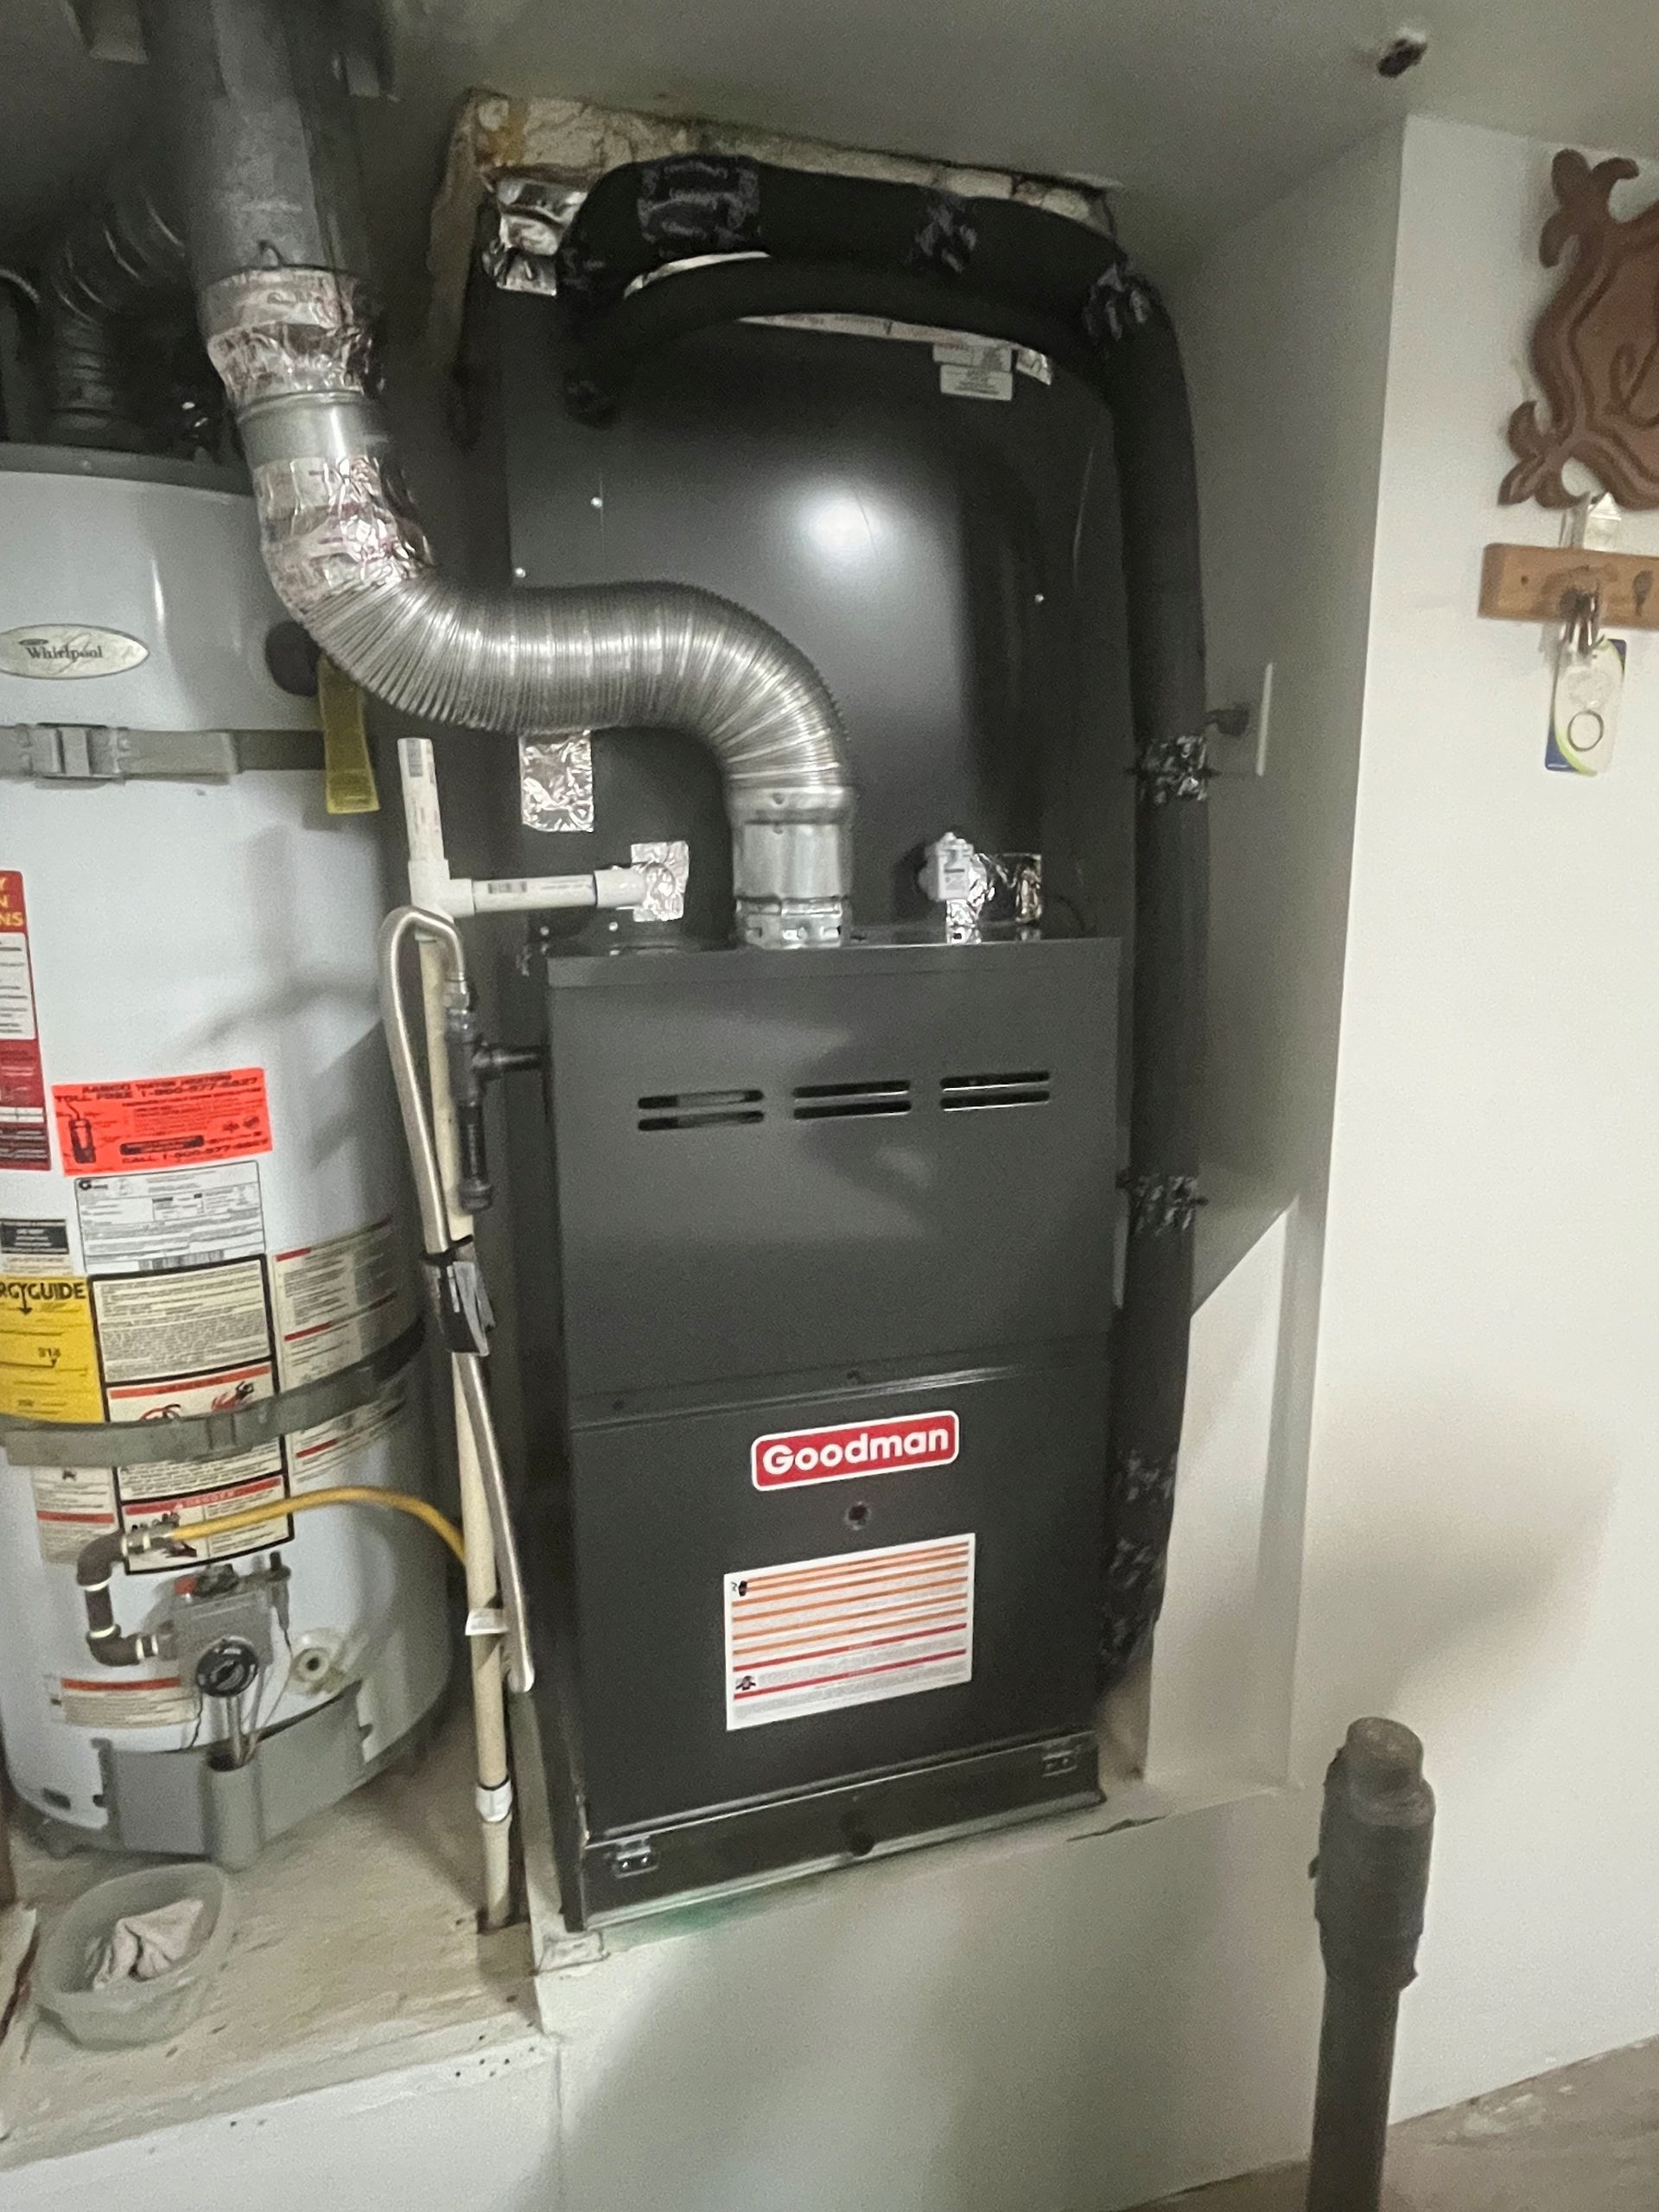 A gas heater is sitting next to a water heater in a basement.